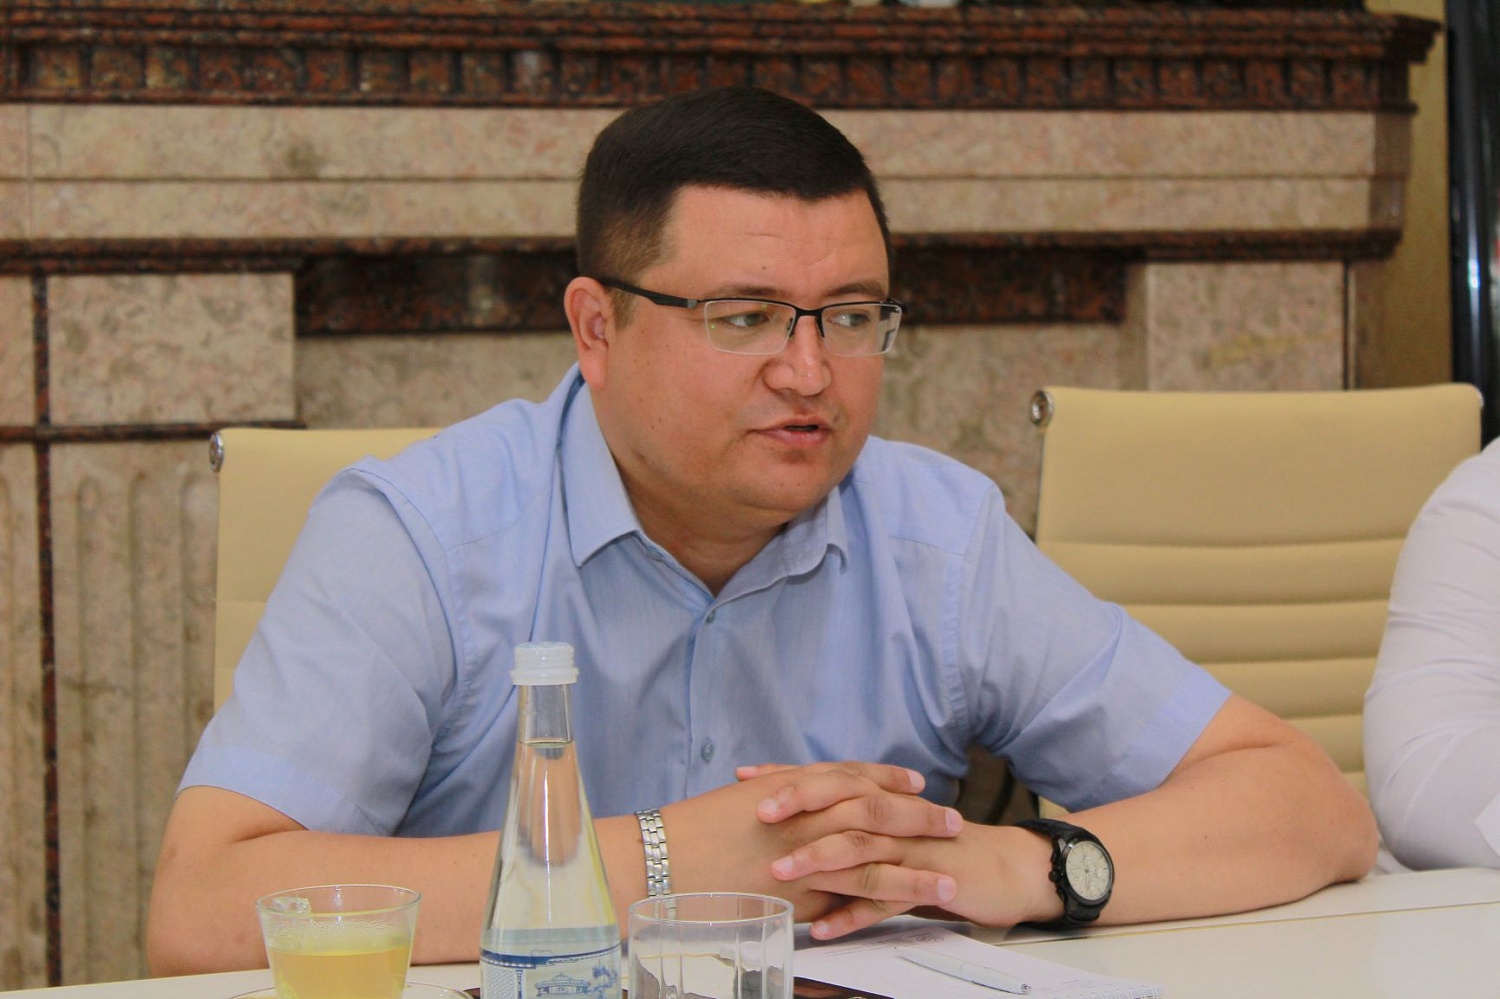 Working trip of the Chairman of the Board of Directors of "AVAS Group" to the Republic of Uzbekistan